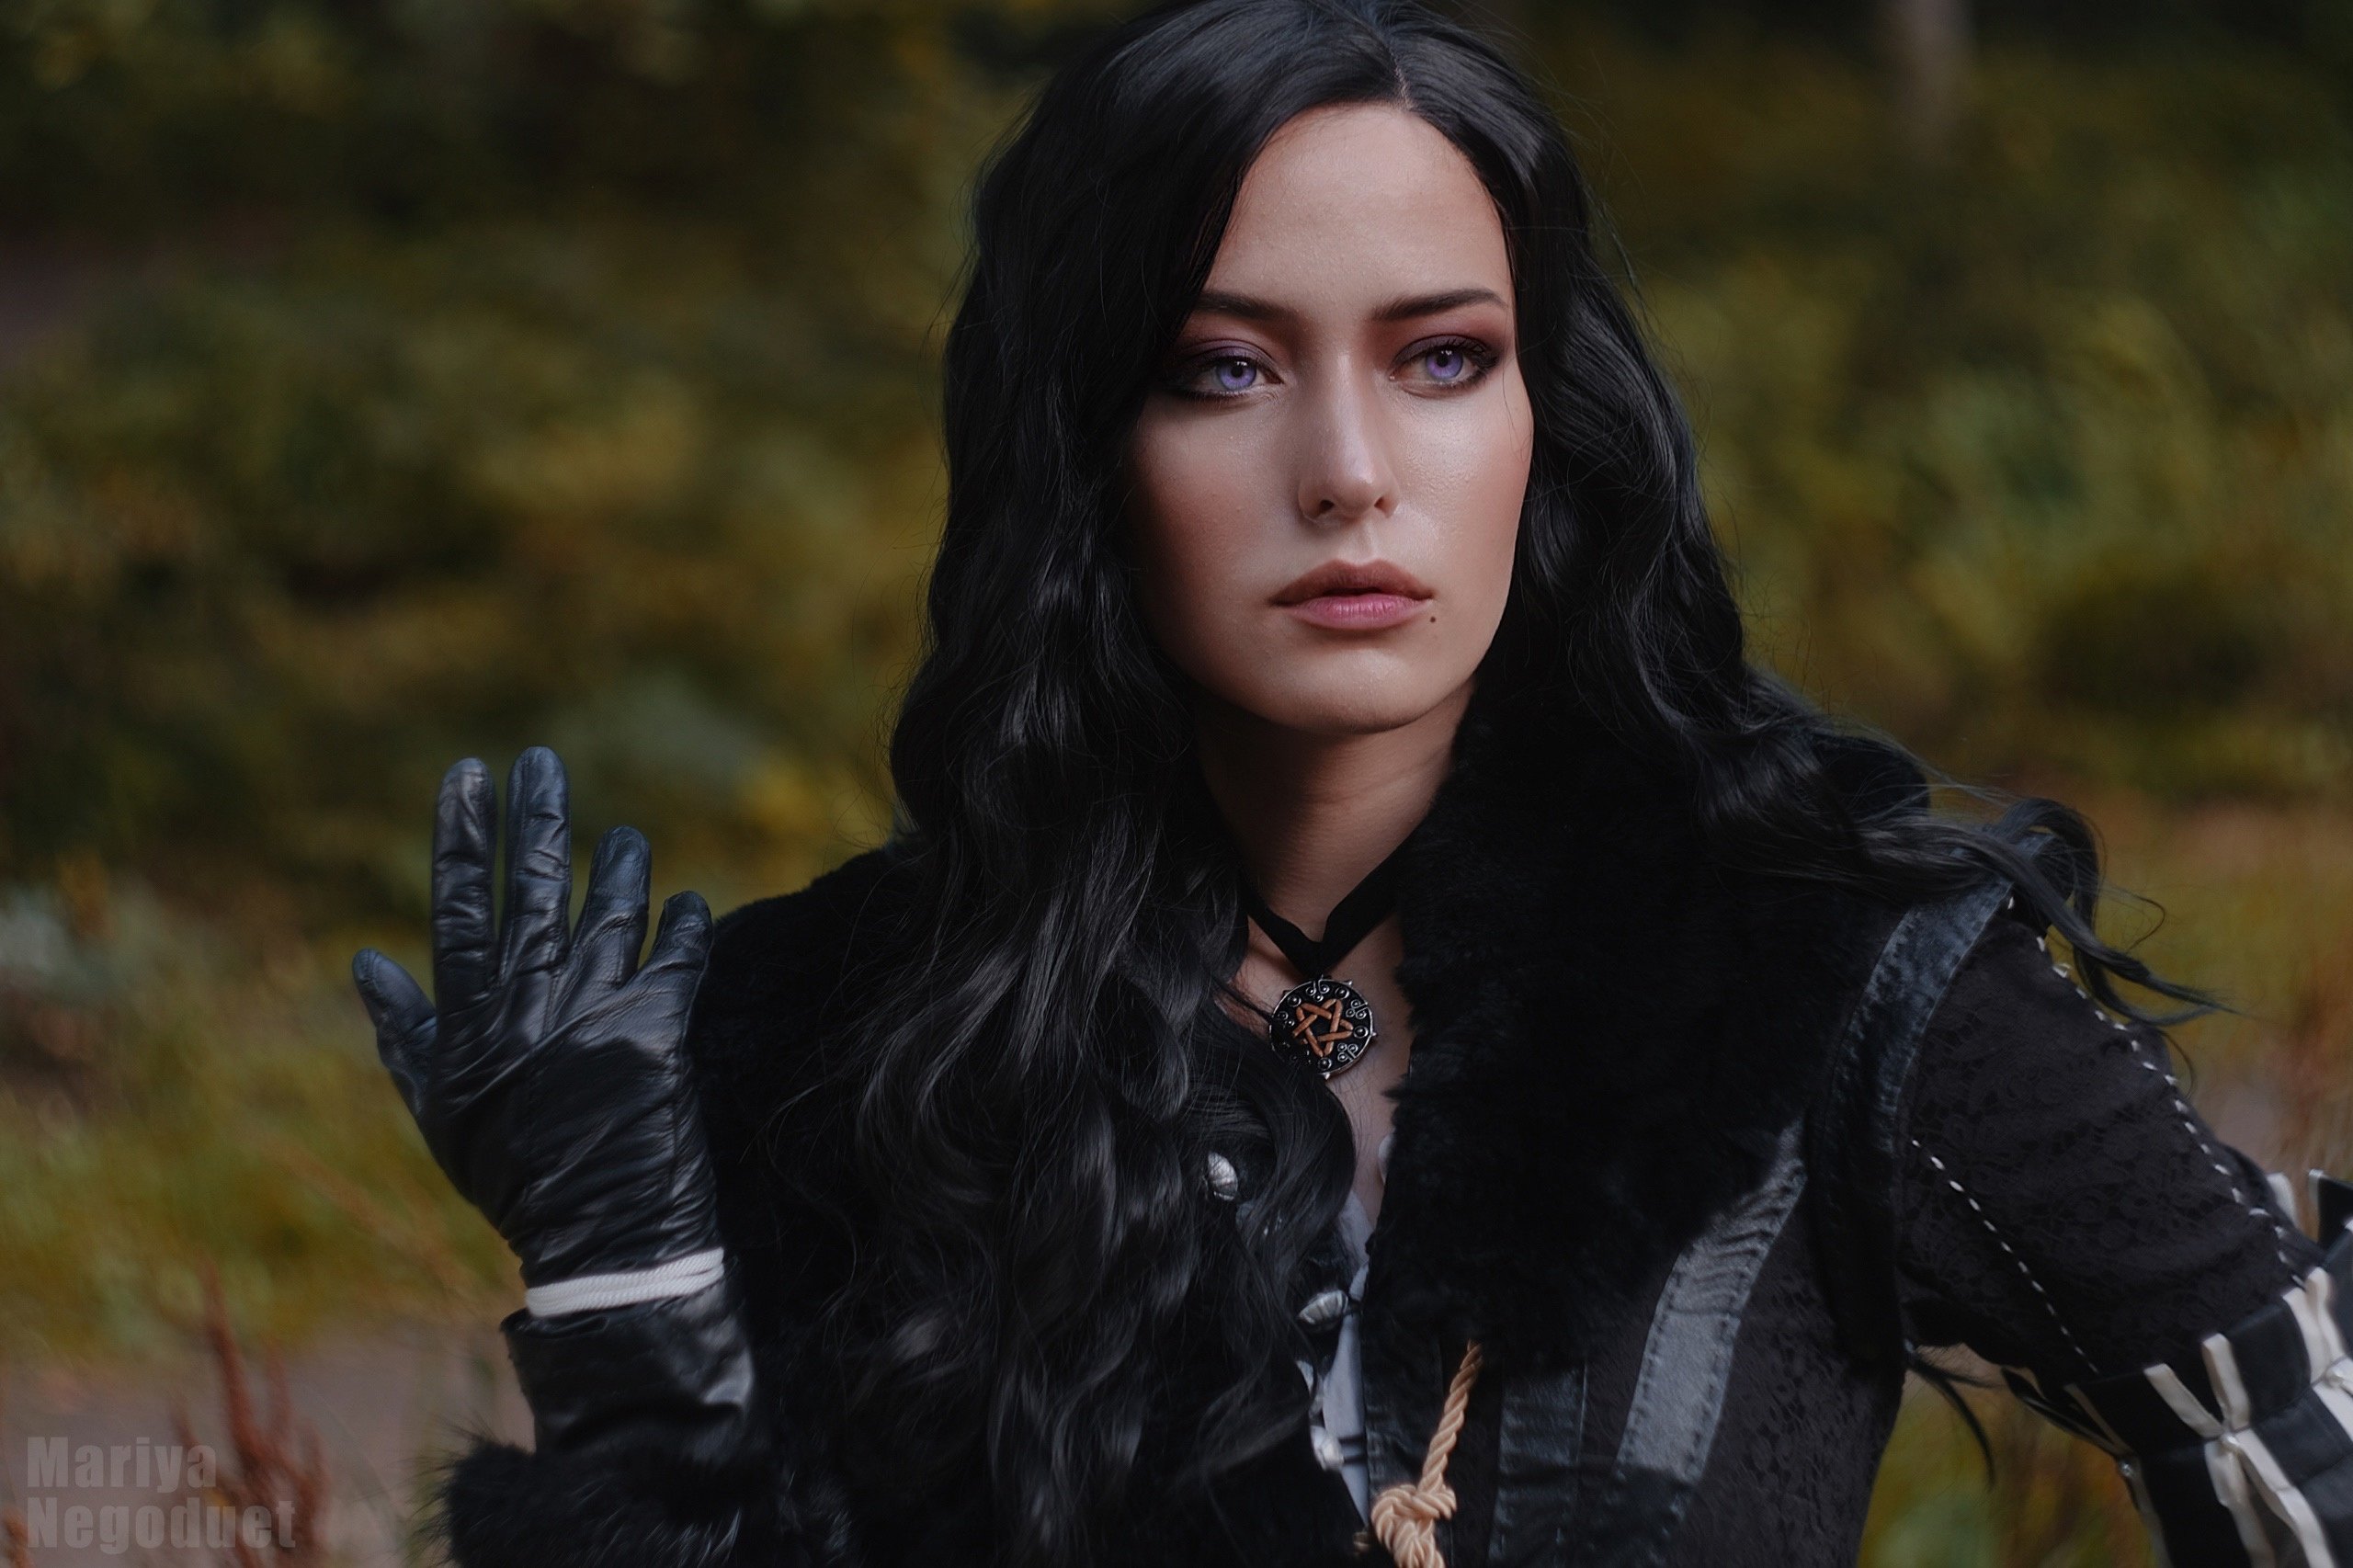 Yennefer of vengerberg the witcher 3 voiced standalone follower фото 68